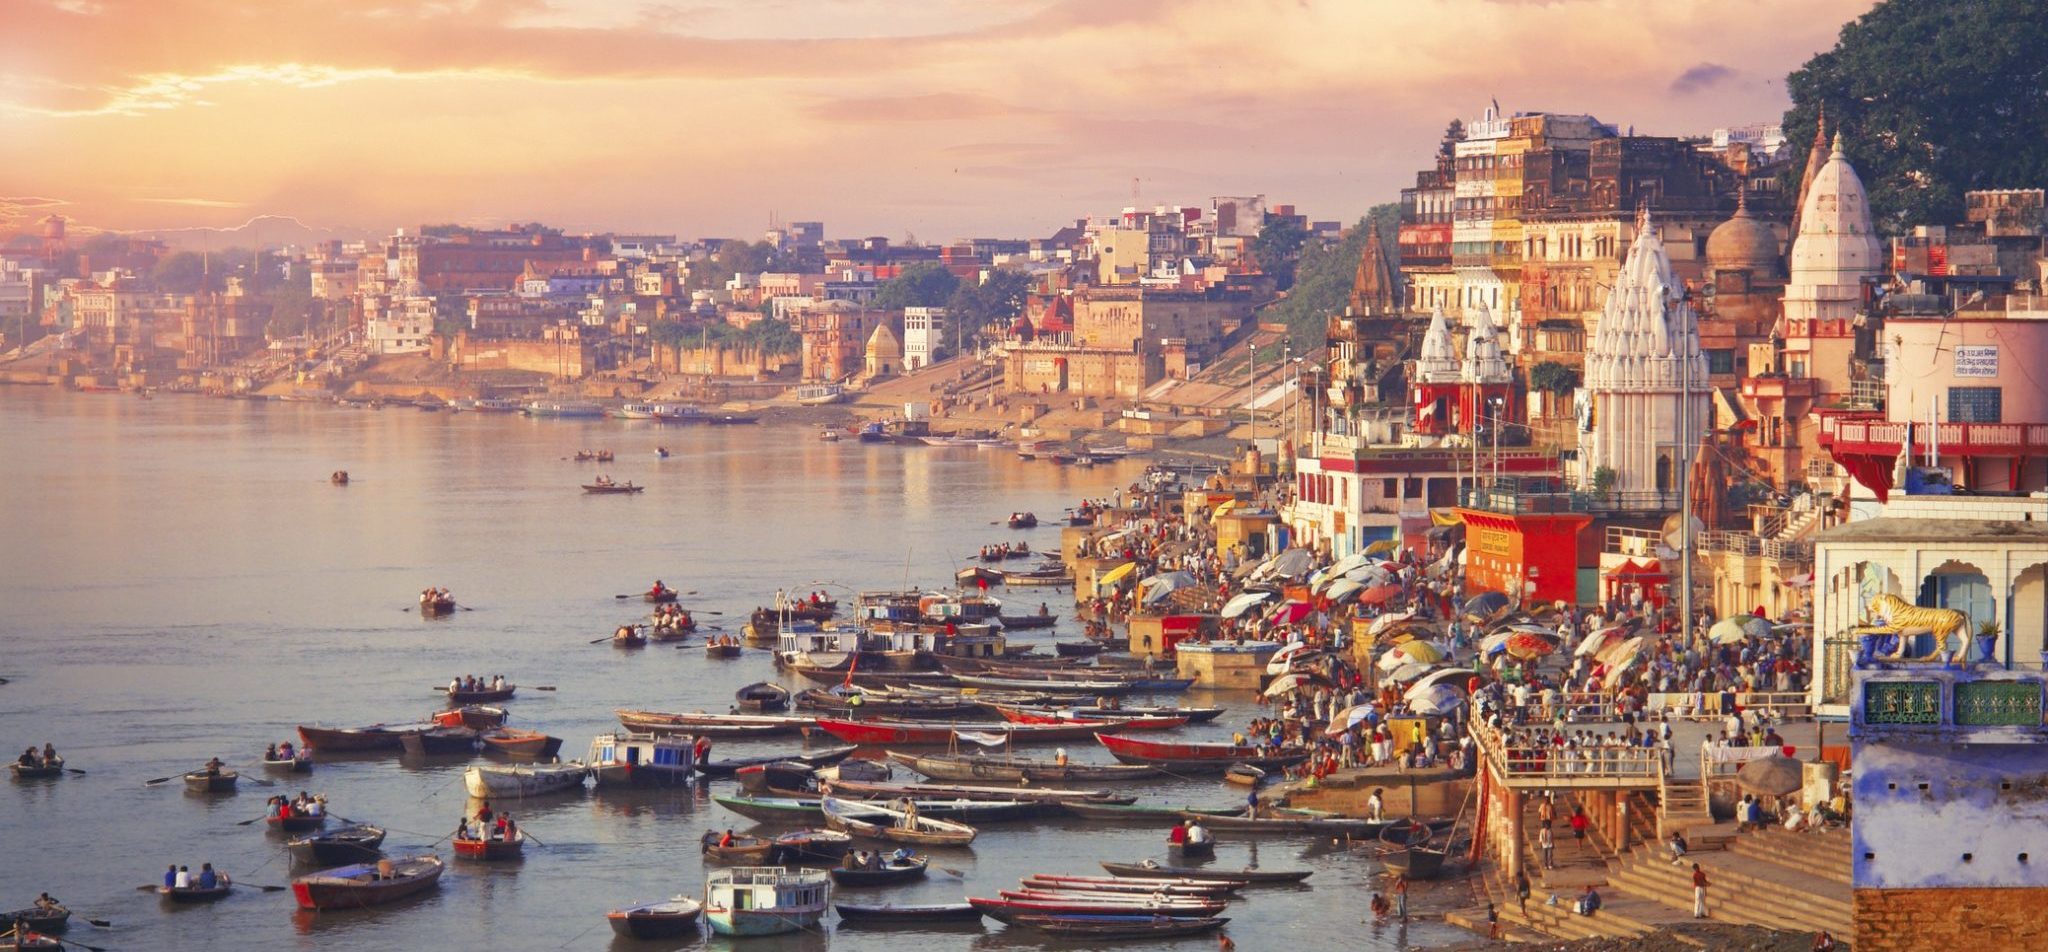 A sacred spot in India – the Ganges River.